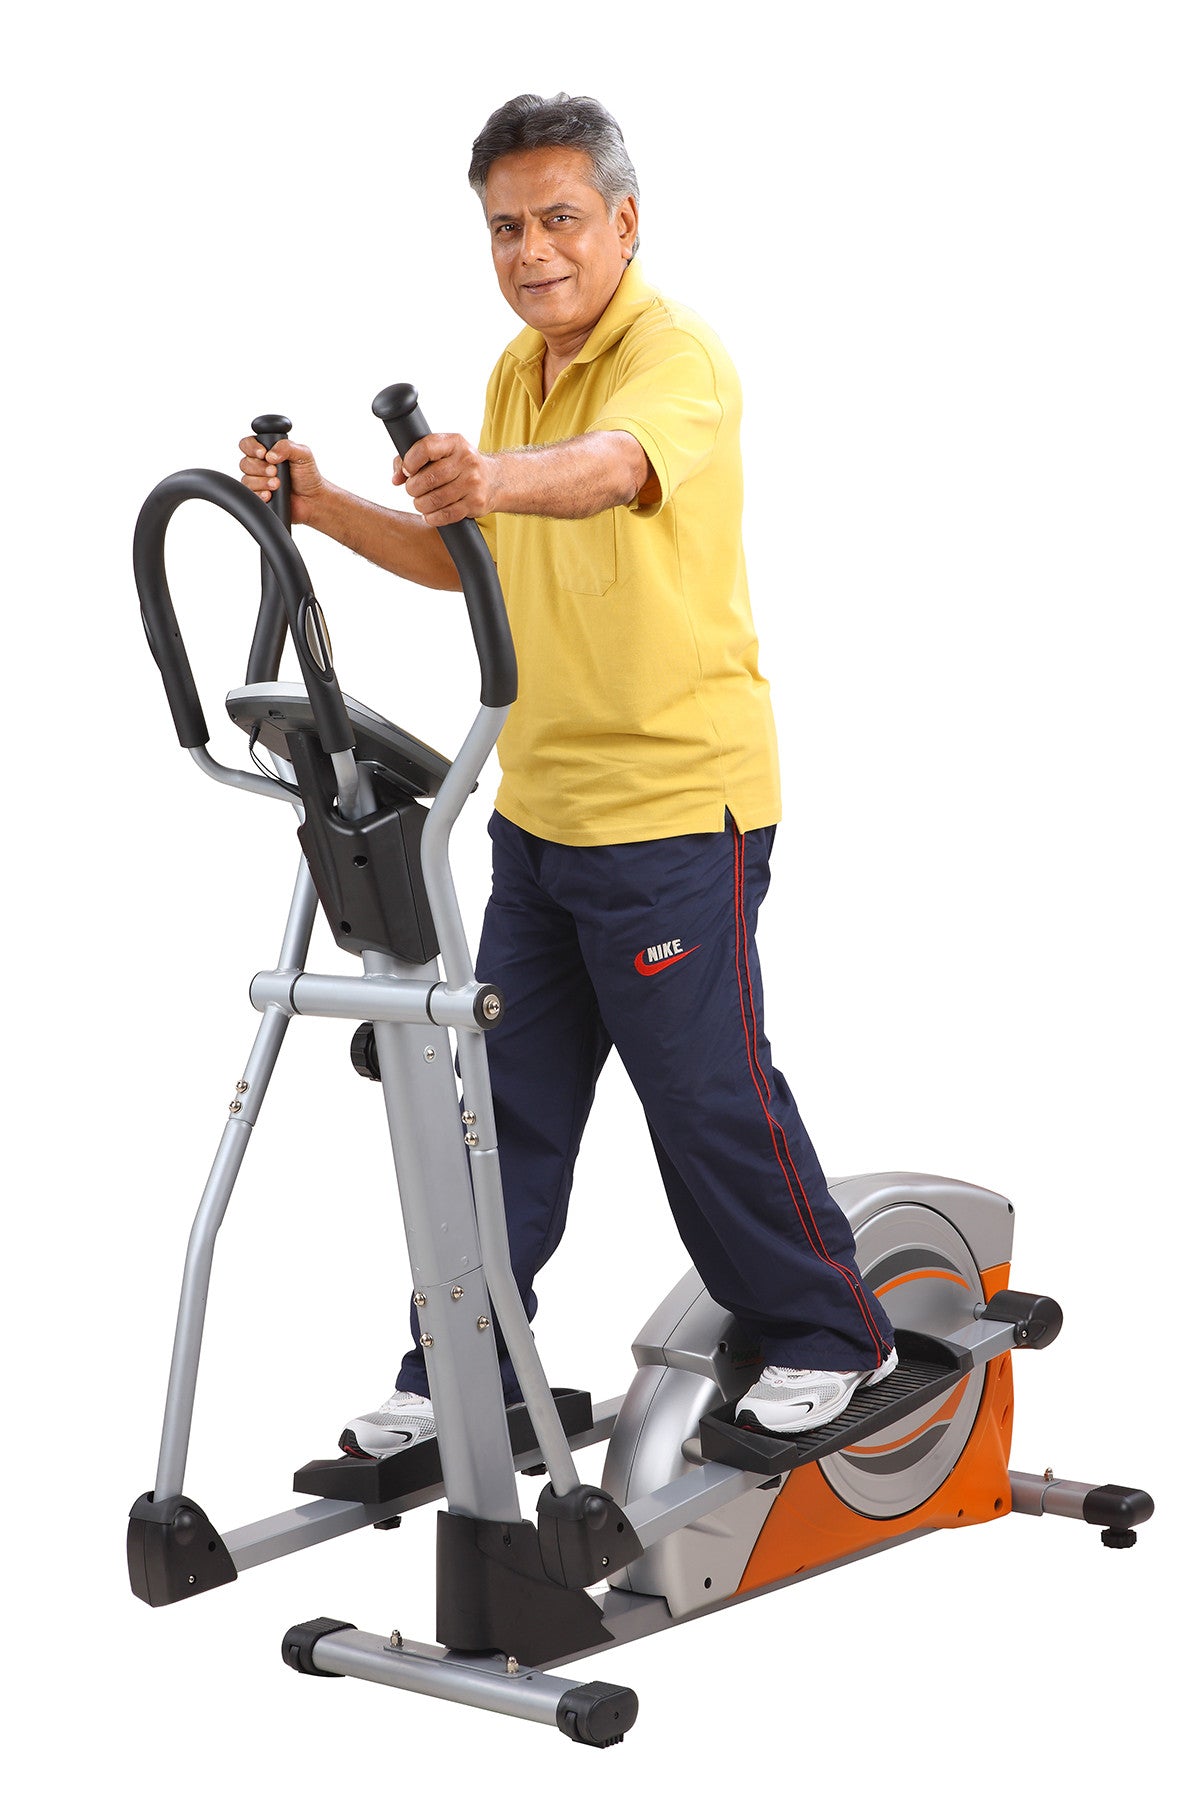 Know About Elliptical Cross Trainer A Buying Guide Fitnessone